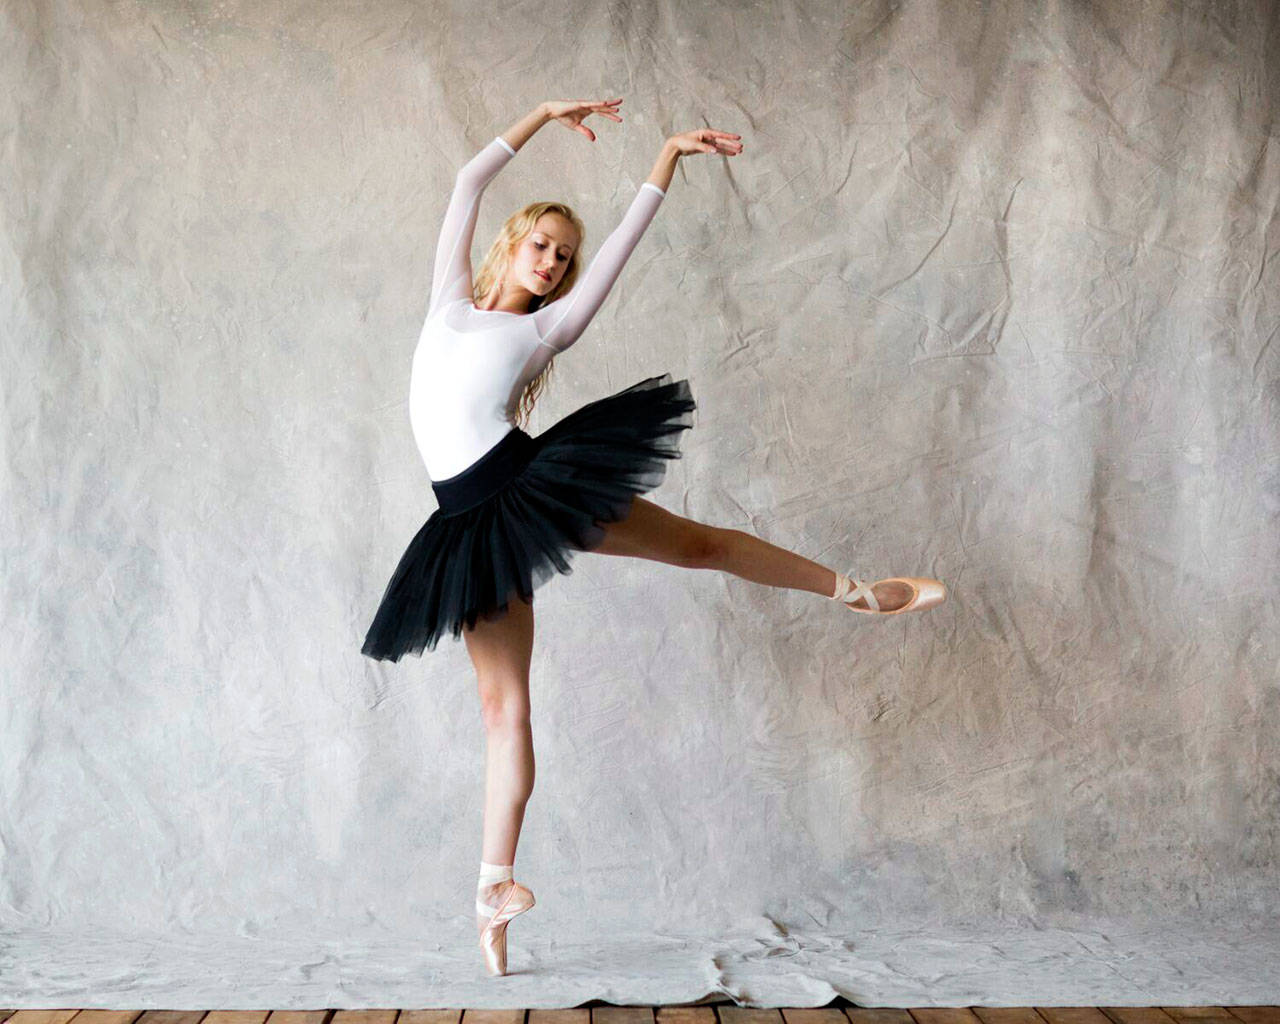 Guest ballerina Lauren Ostrander, an apprentice with the National Ballet of Canada, will perform the lead role of Princess Aurora in Ballet Workshop’s “Sleeping Beauty” on Saturday and Sunday. (Karolina Kuras)